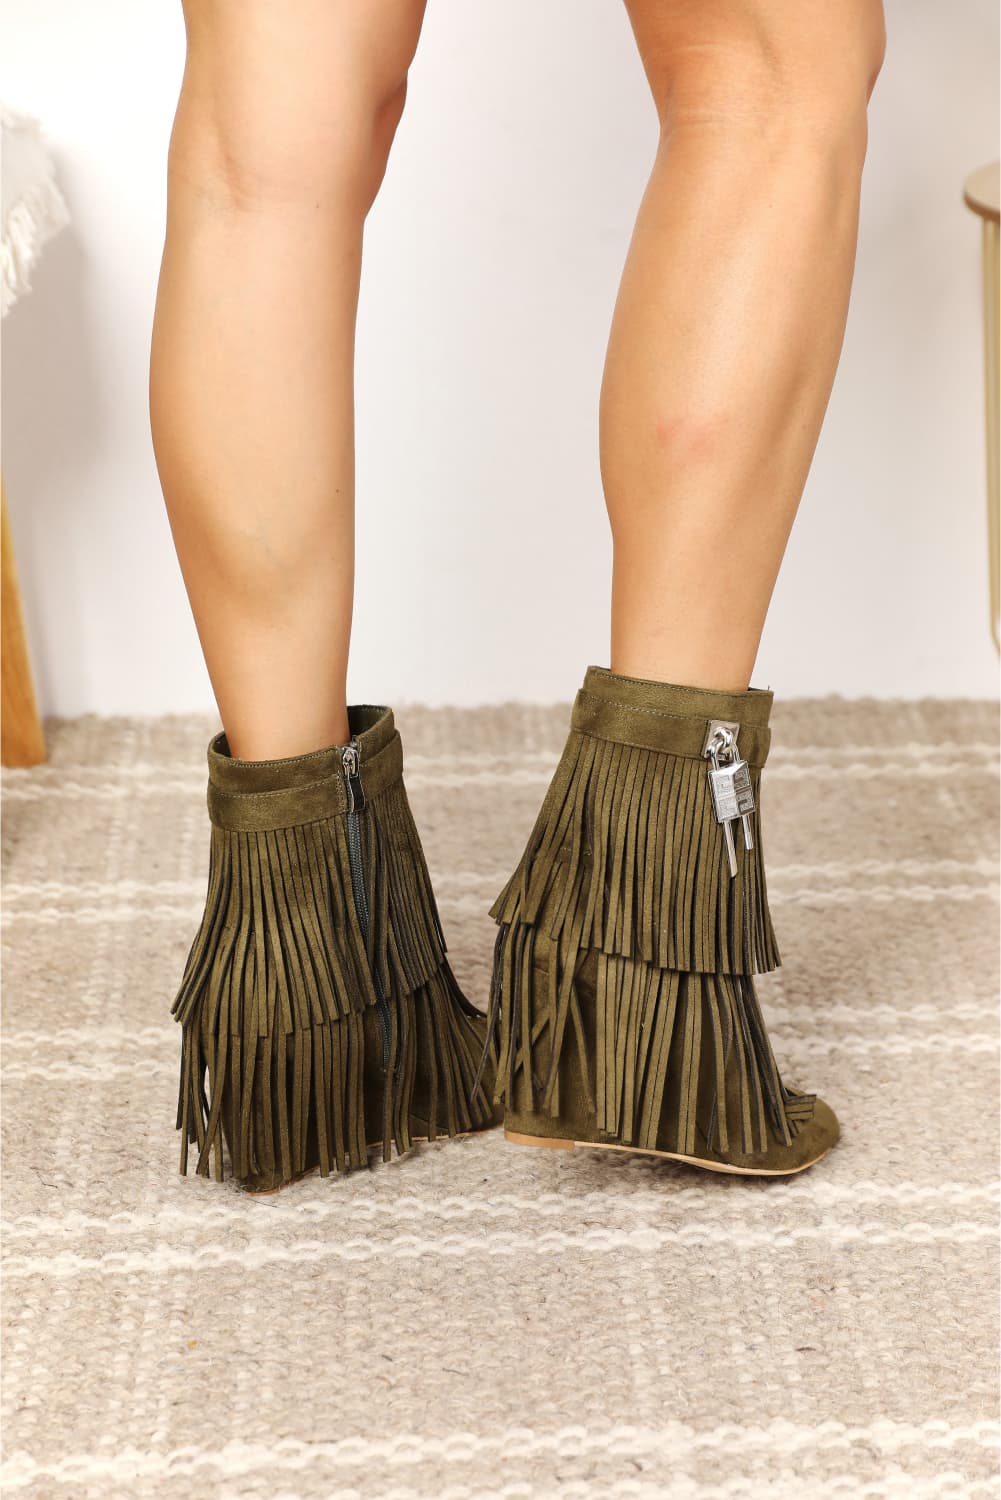 Legend Fringed Wedge Heel Pointy Toe Olive Green Ankle Booties Boots